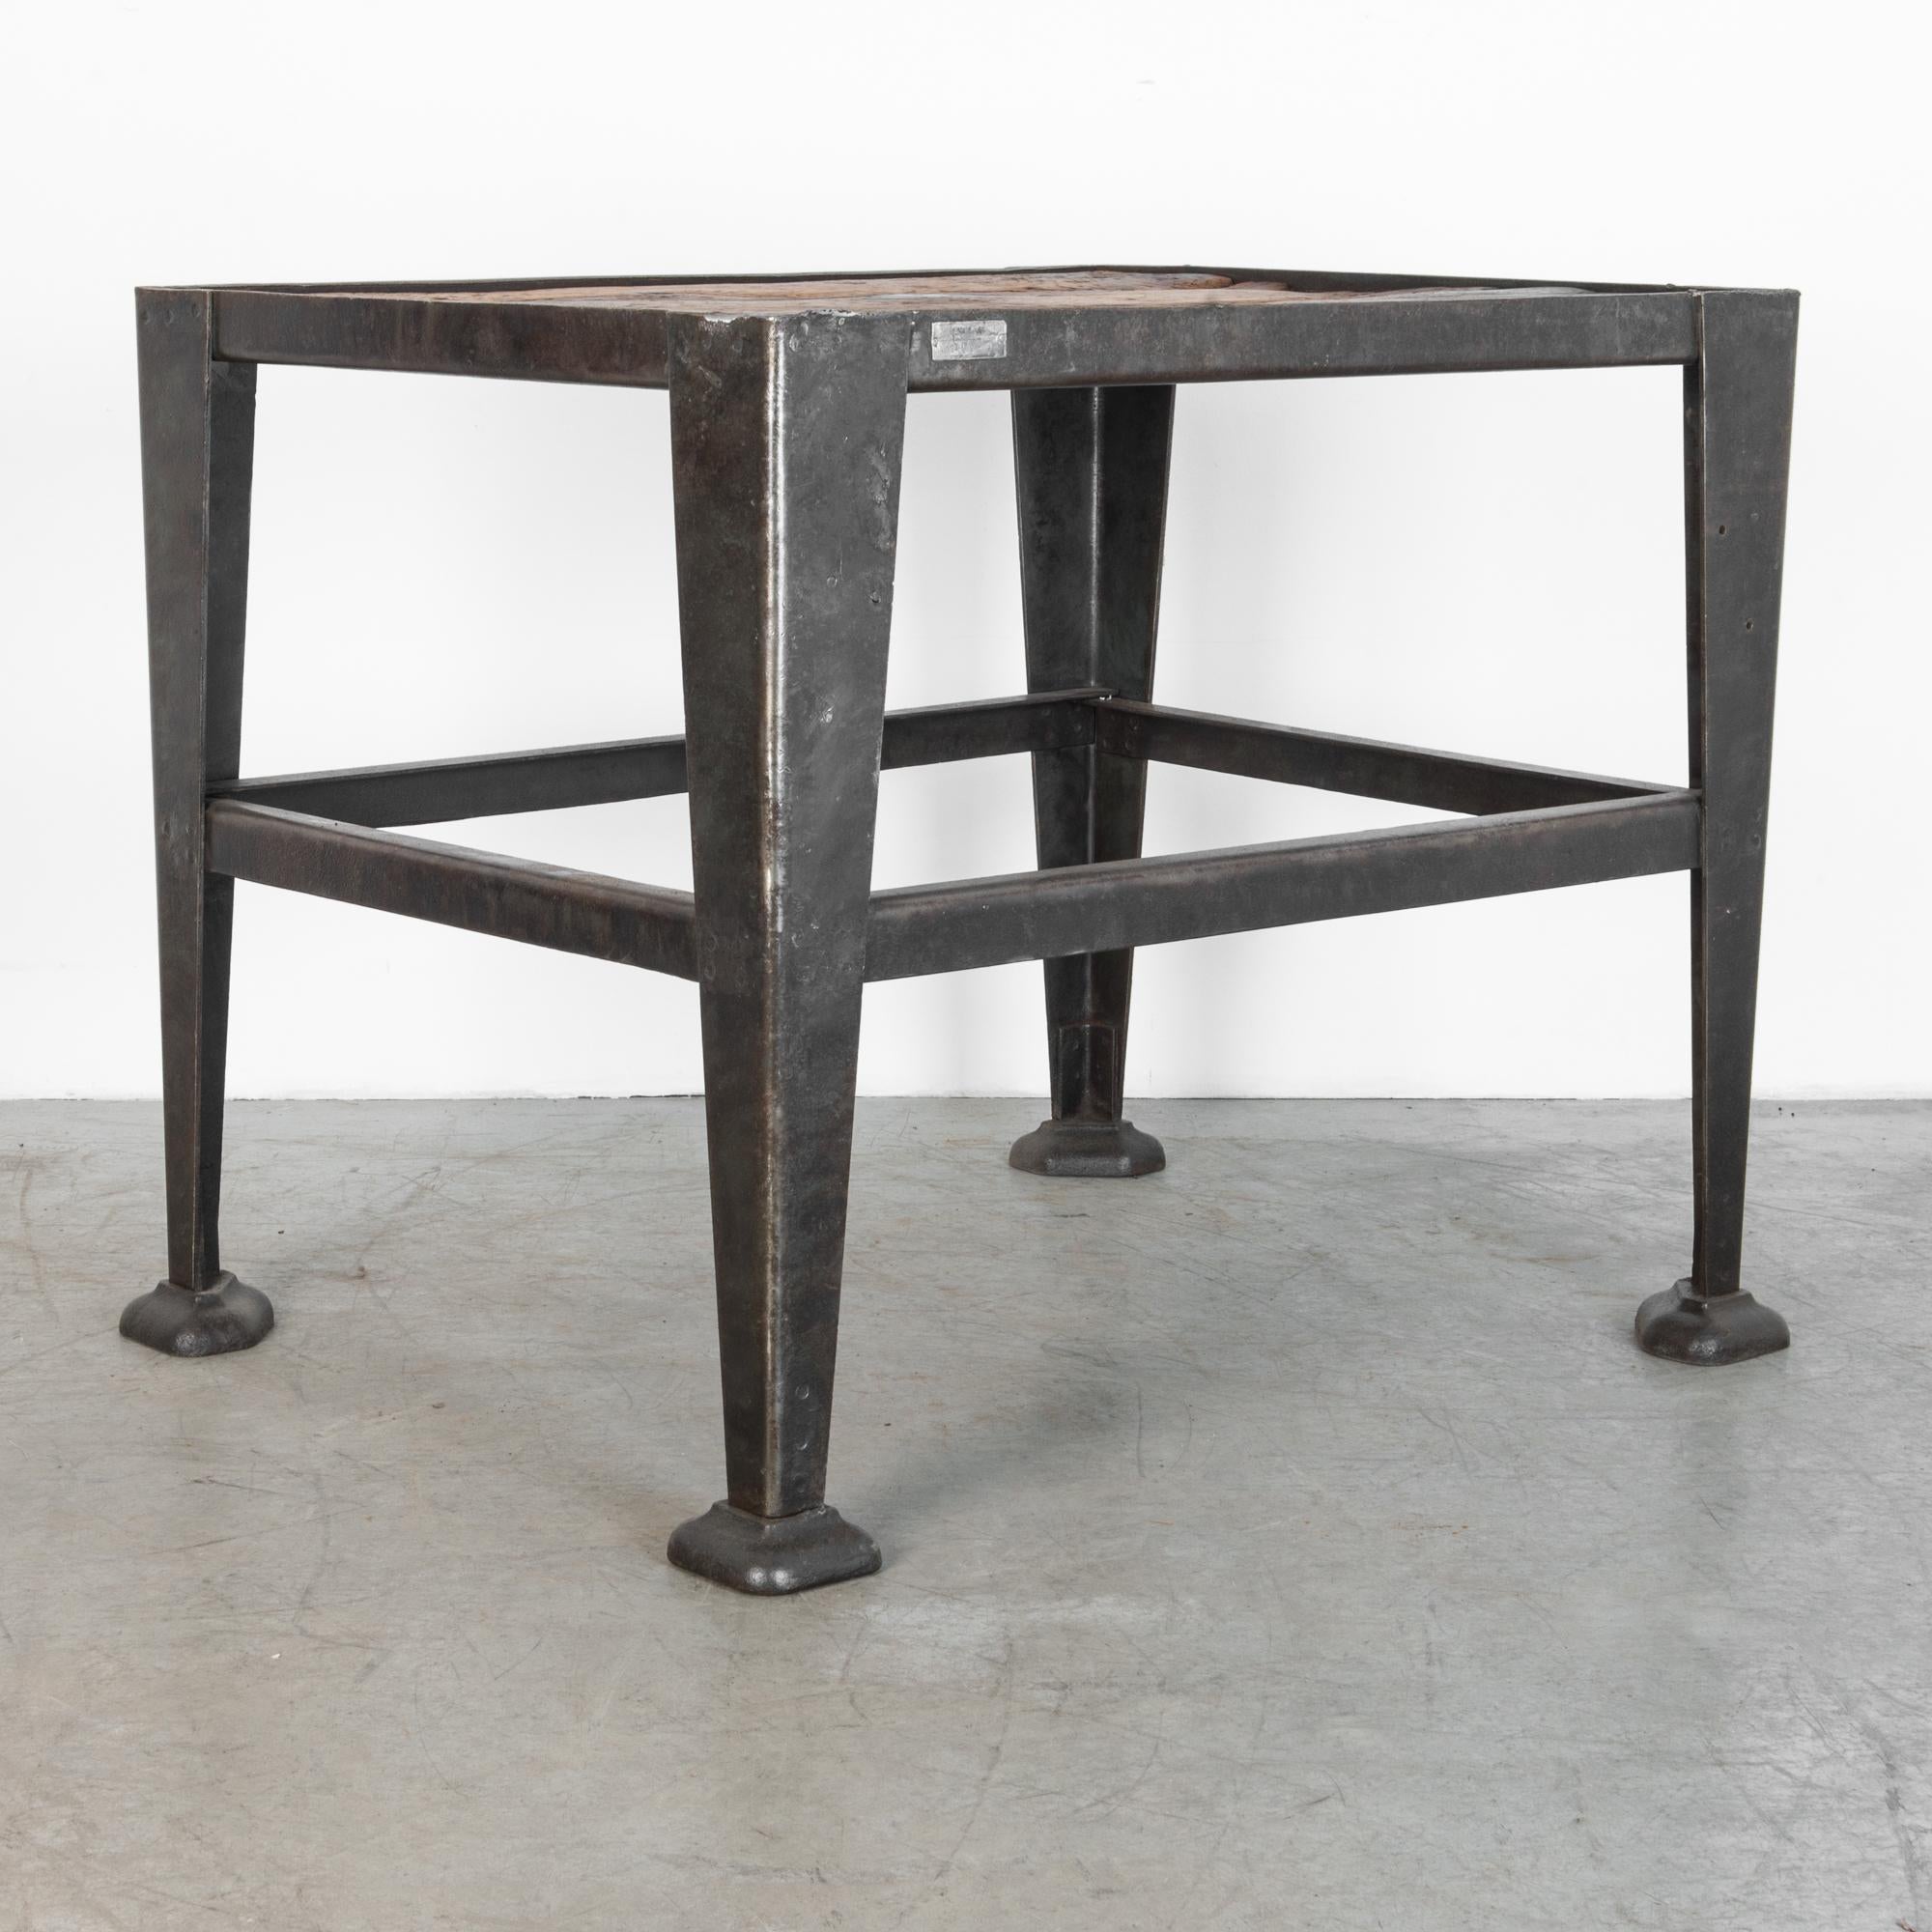 Produced in Czech Republic, circa 1950. This sturdy functional table is made of bended steel legs, and frame, topped with a rusty wood top. With many years as an industrial work surface, the table top has a great worn patina, in dark brown,